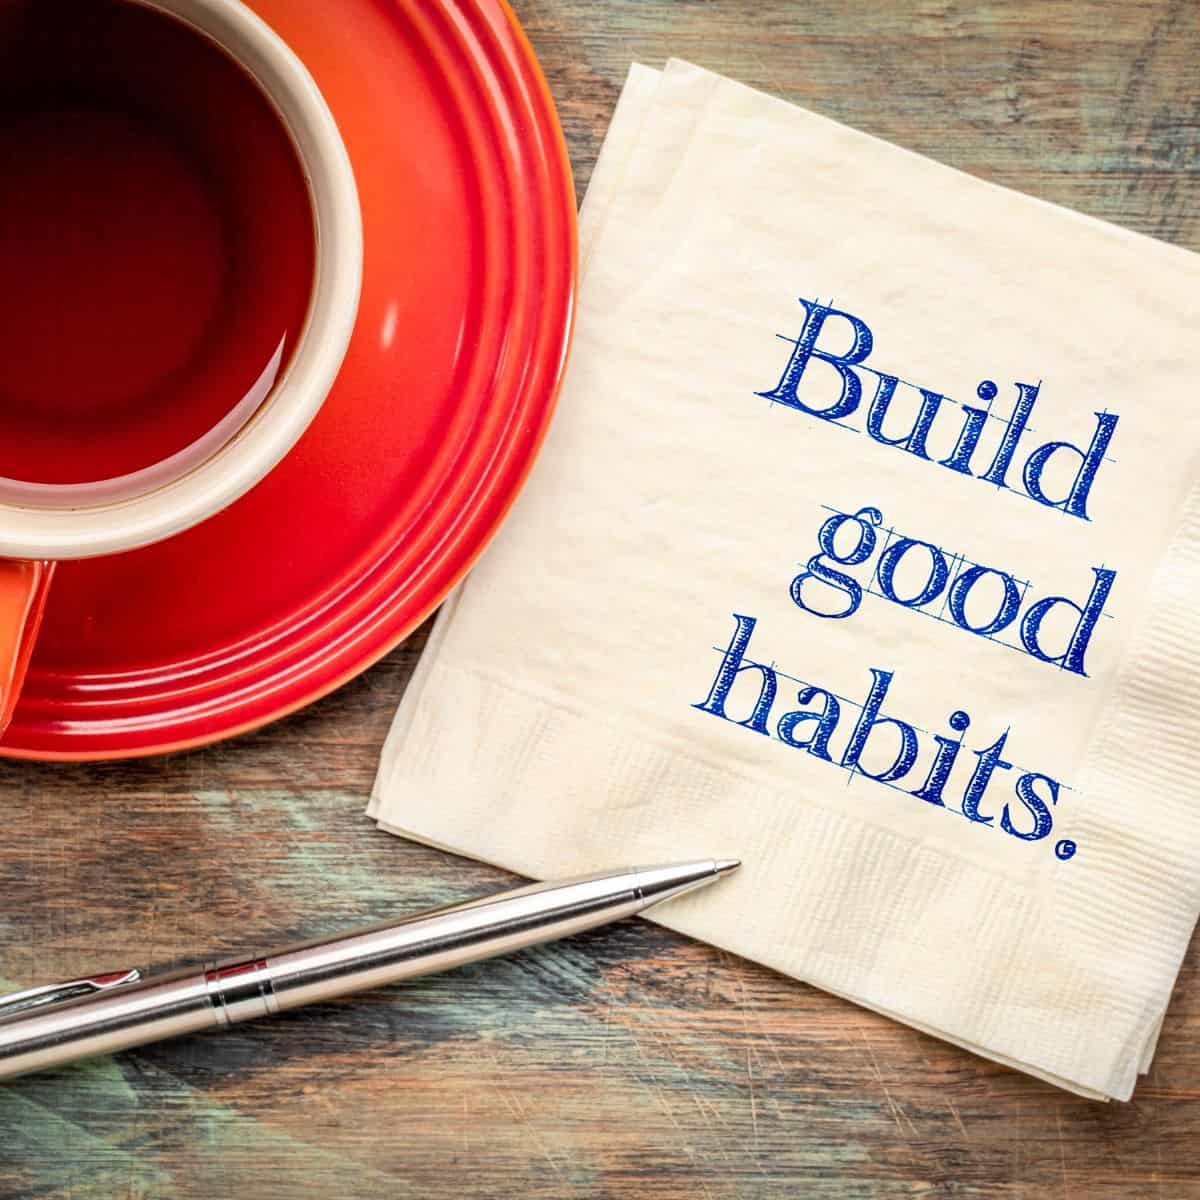 coffee and napkin that says build good habits